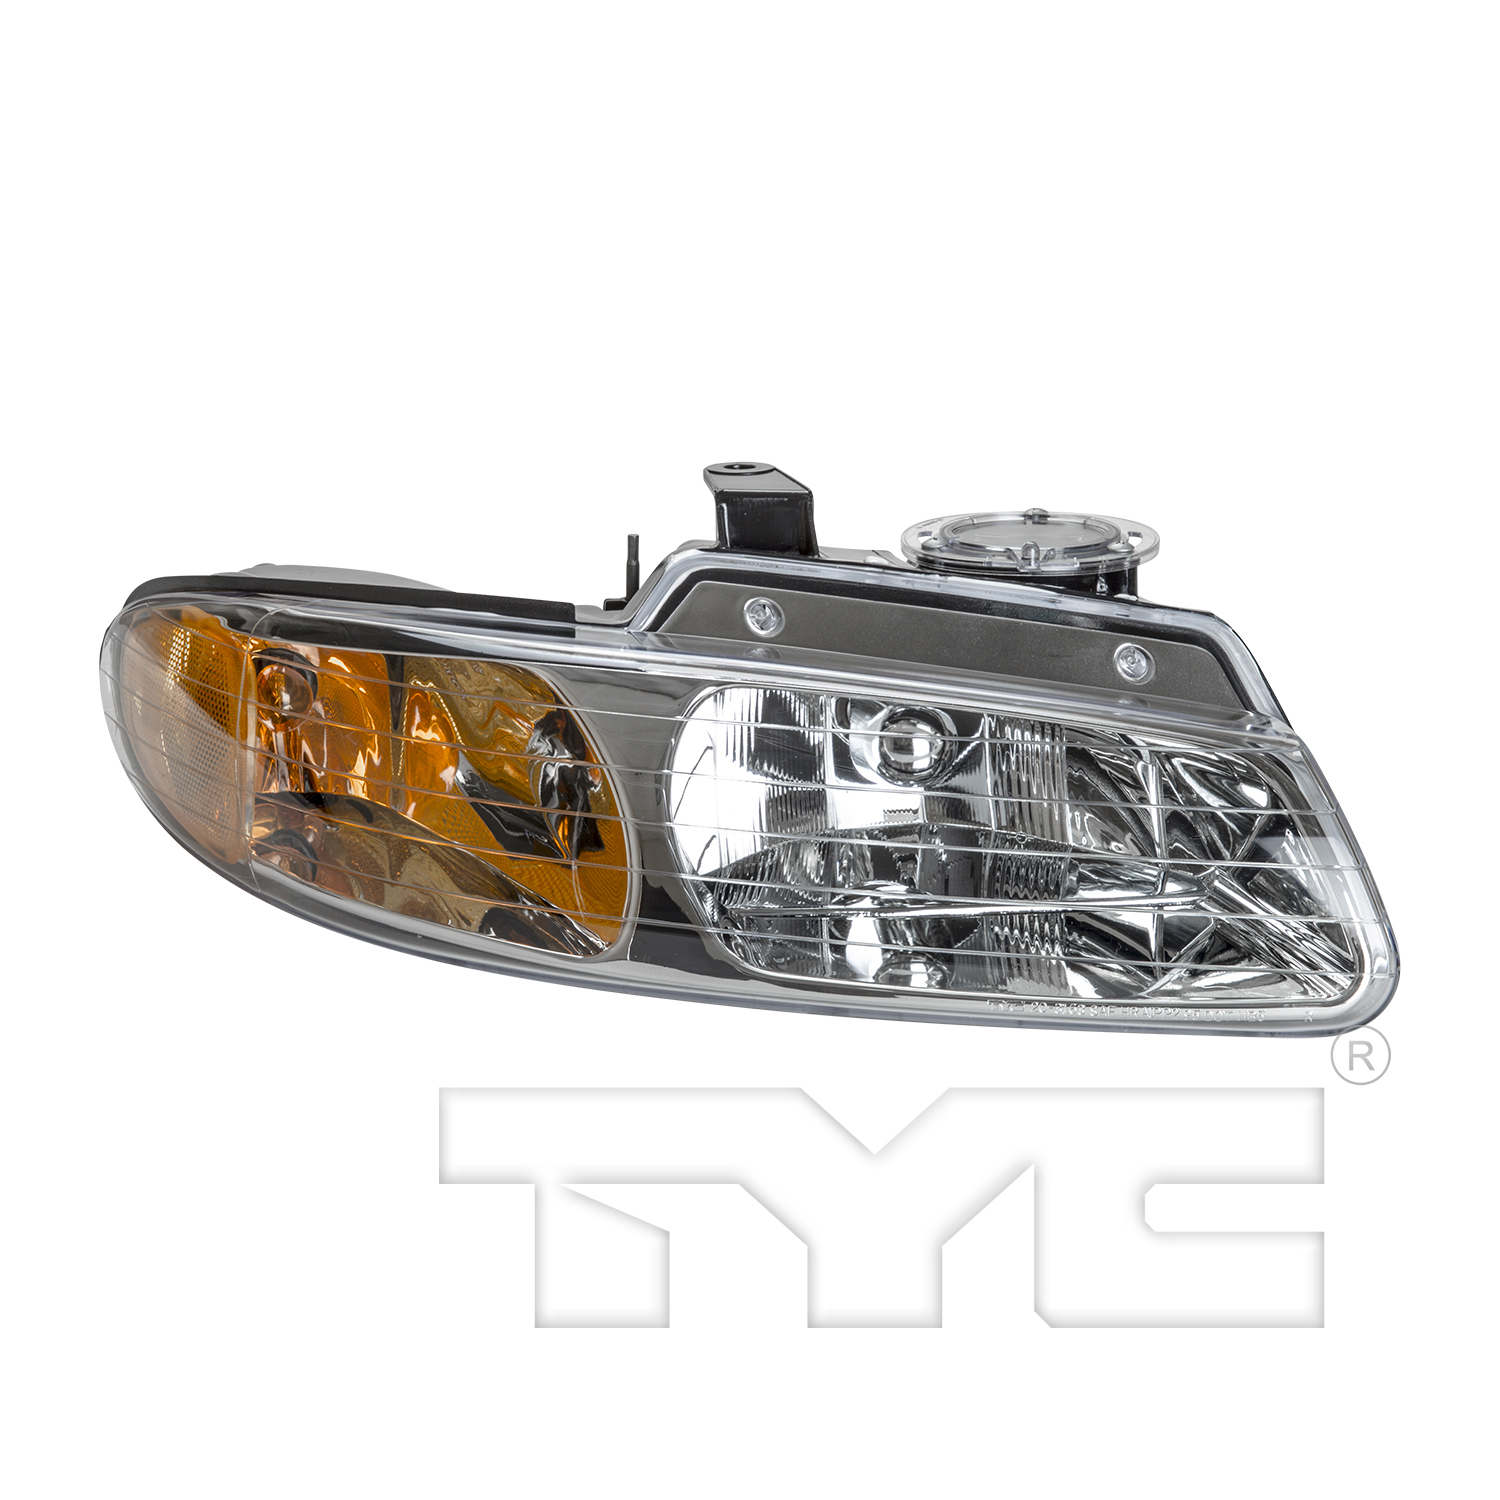 Aftermarket HEADLIGHTS for CHRYSLER - TOWN & COUNTRY, TOWN & COUNTRY,96-99,RT Headlamp assy composite